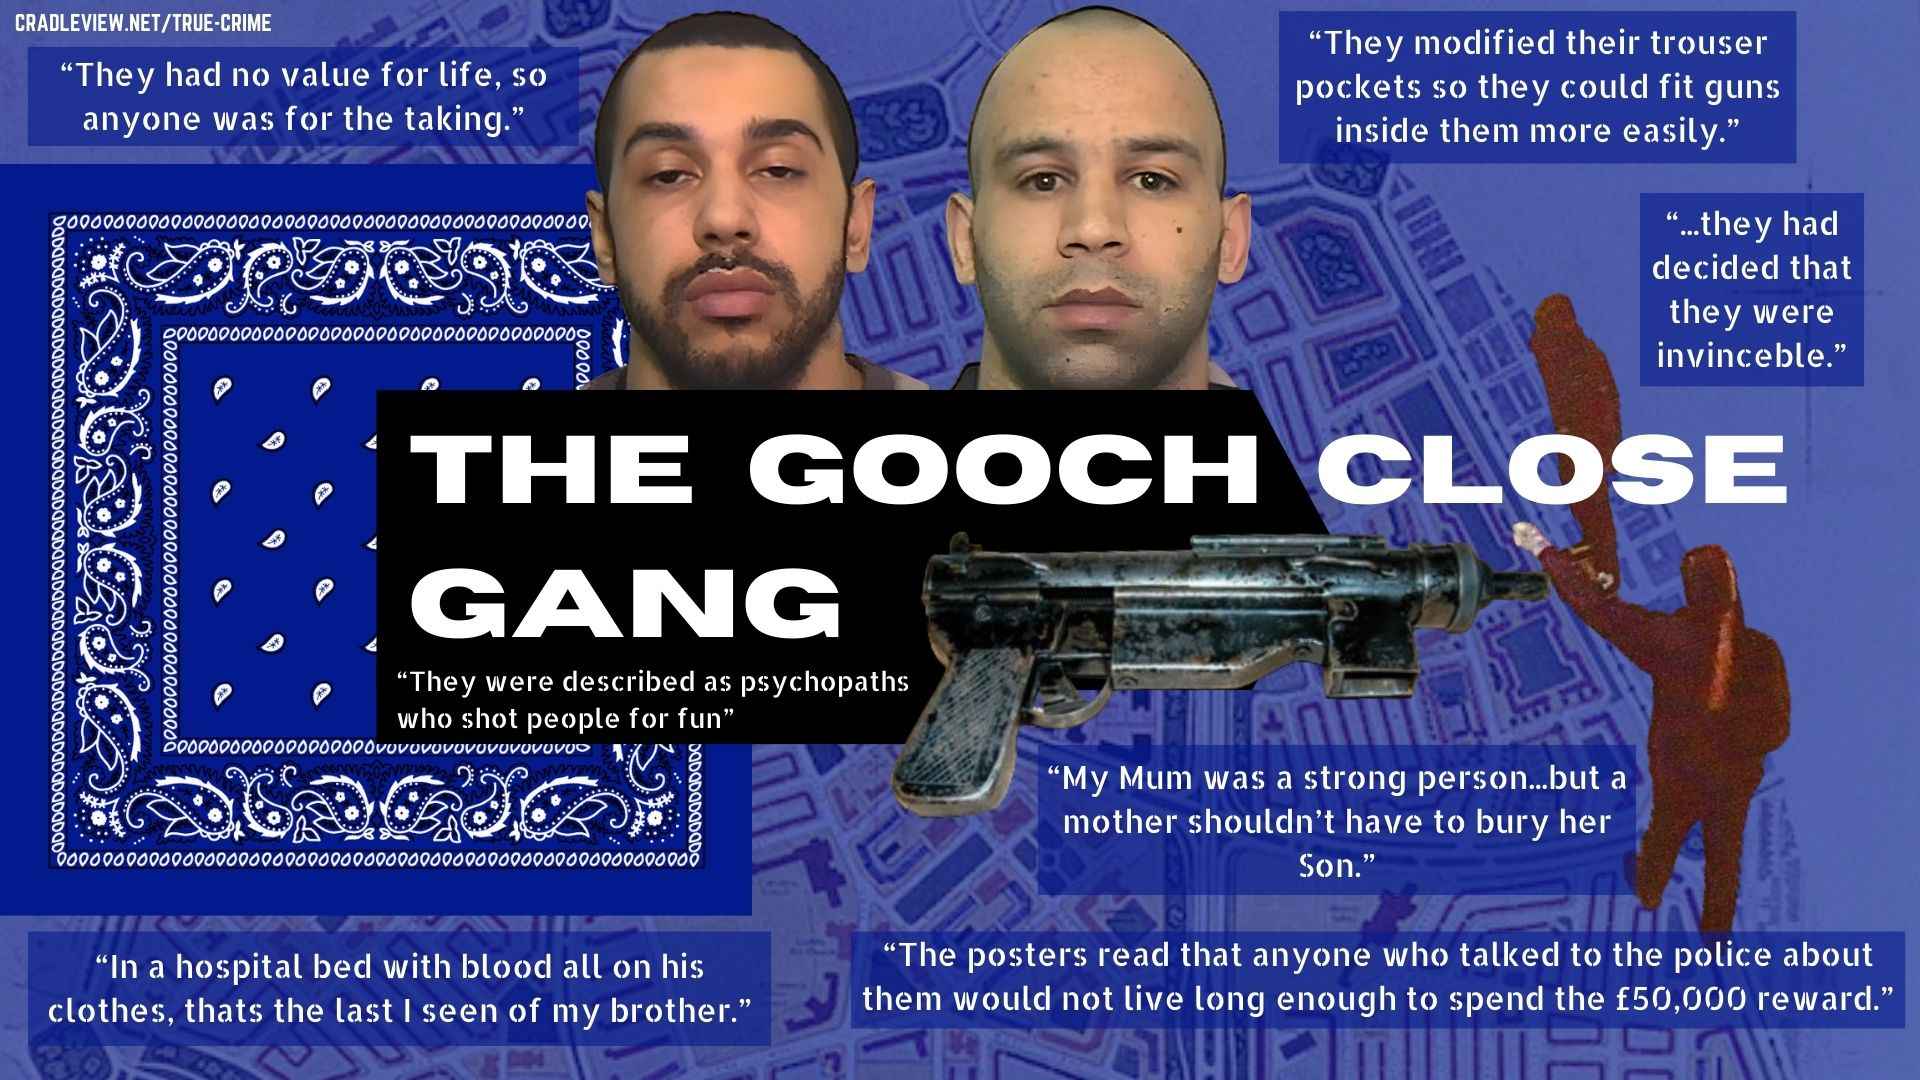 Notorious: The Bloody History Of The Gooch Close Gang